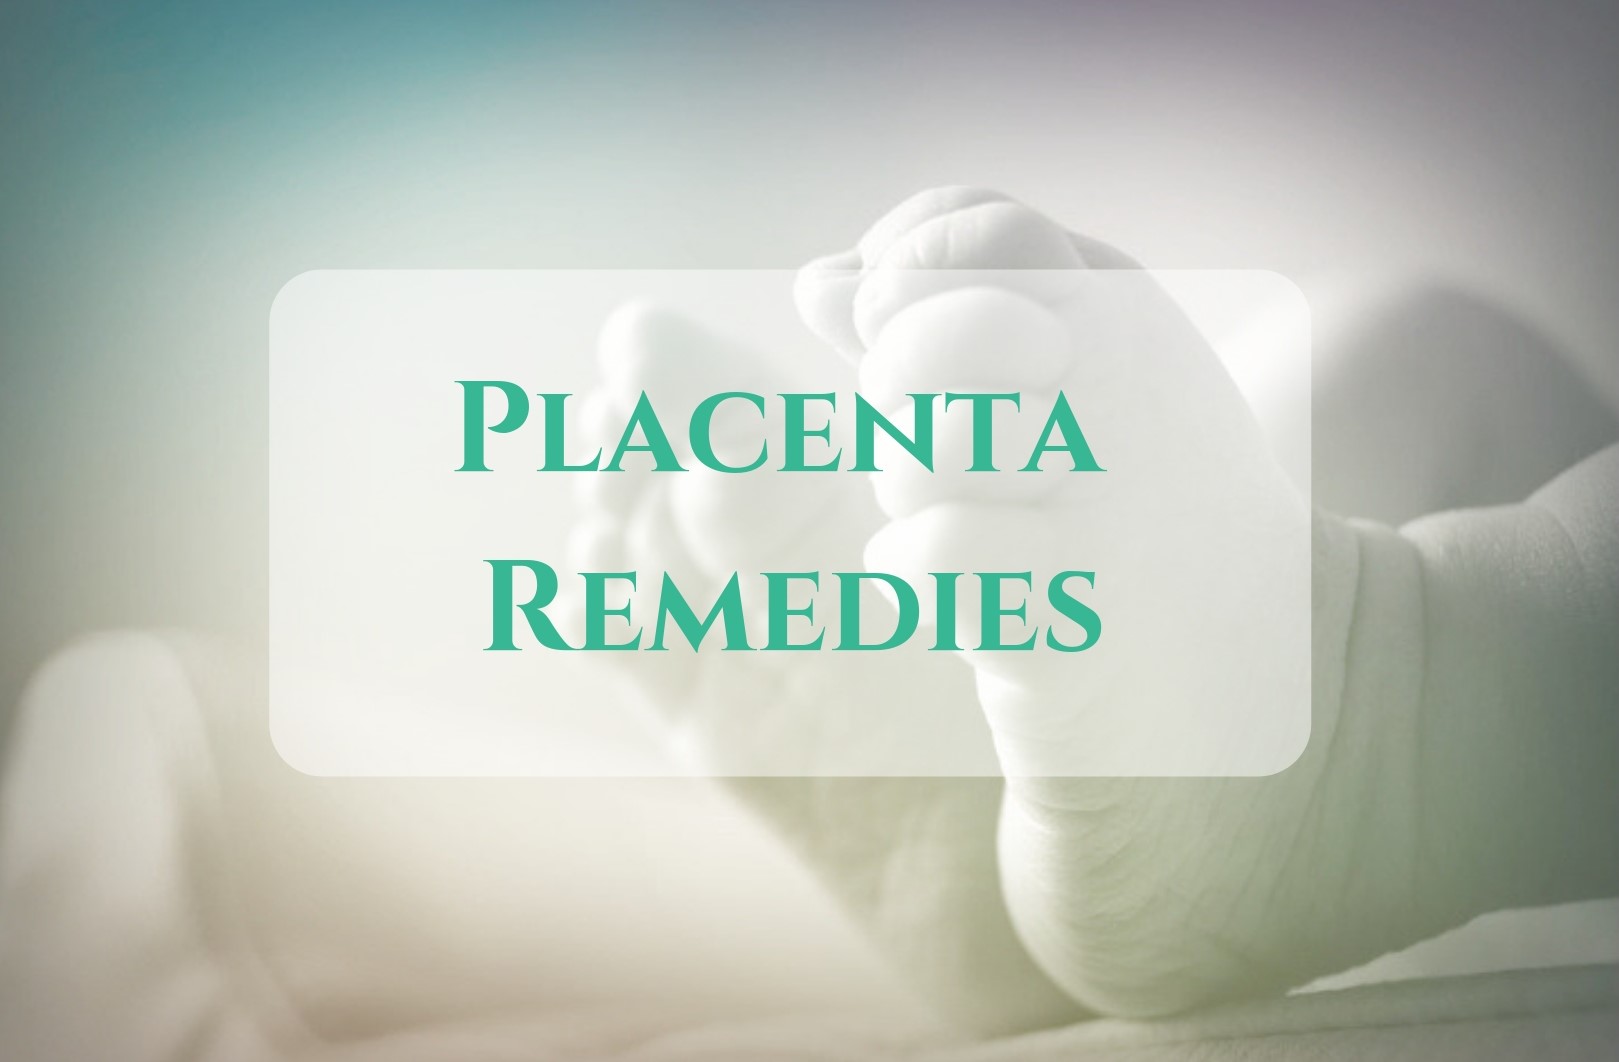 Placenta Encapsulation Remedies available with Mo Chuisle Our Lady of Lourdes Hospital, Drogheda